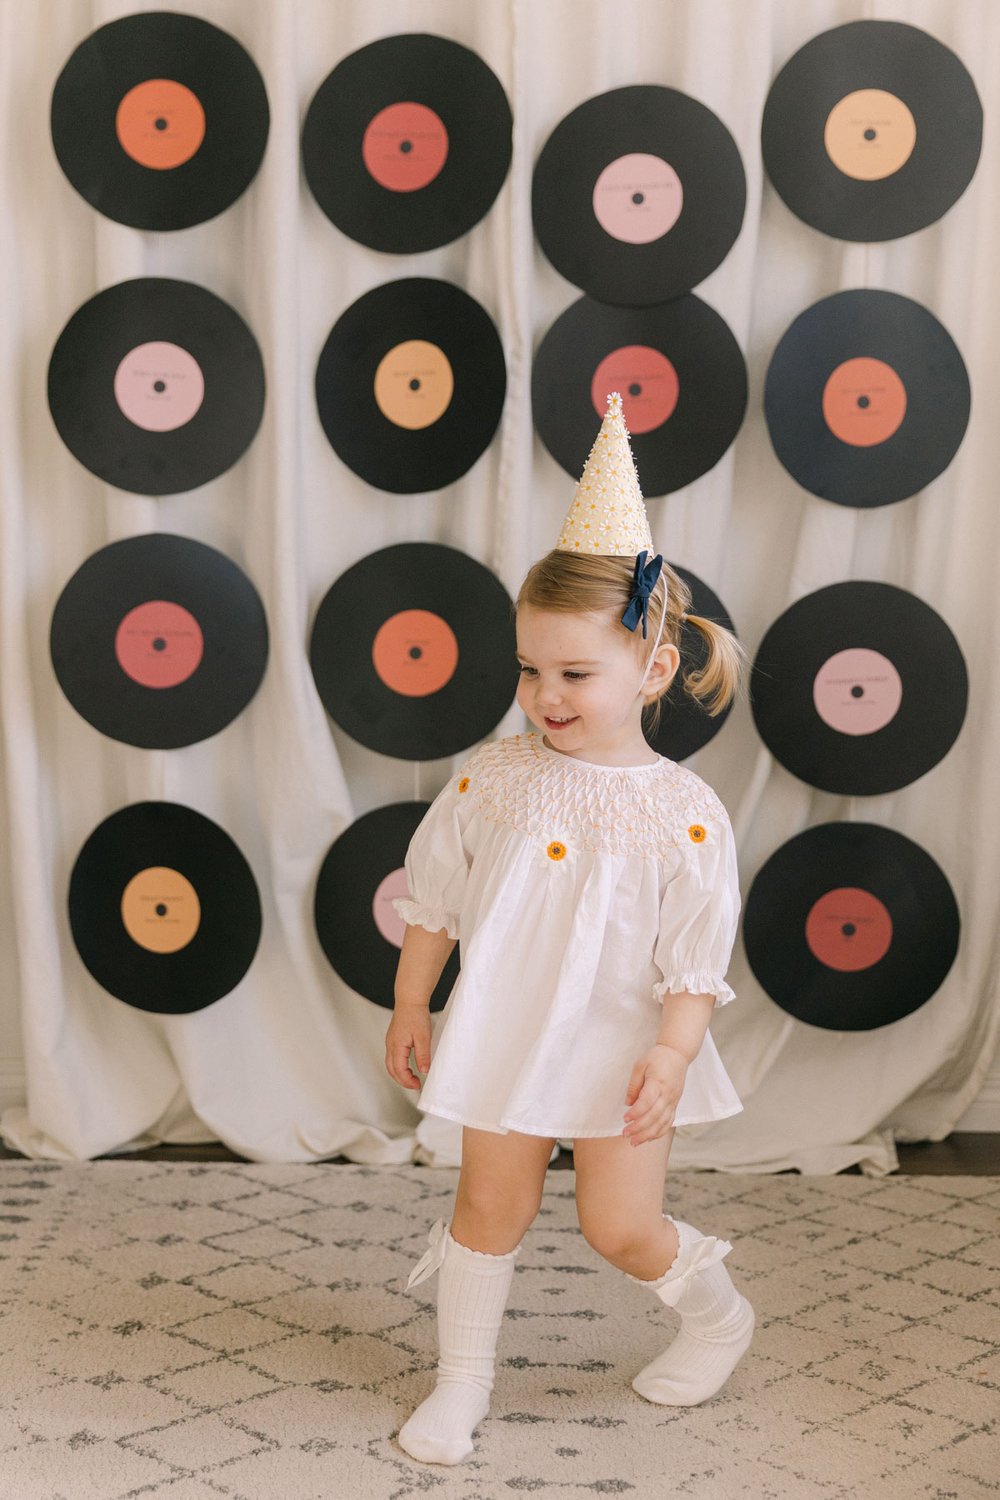 DIY Record Wall Tutorial "Two Groovy" Birthday Party Theme - Inspiration and Free Downloads Calgary Family Lifestyle Photographer Jennie Guenard Photography